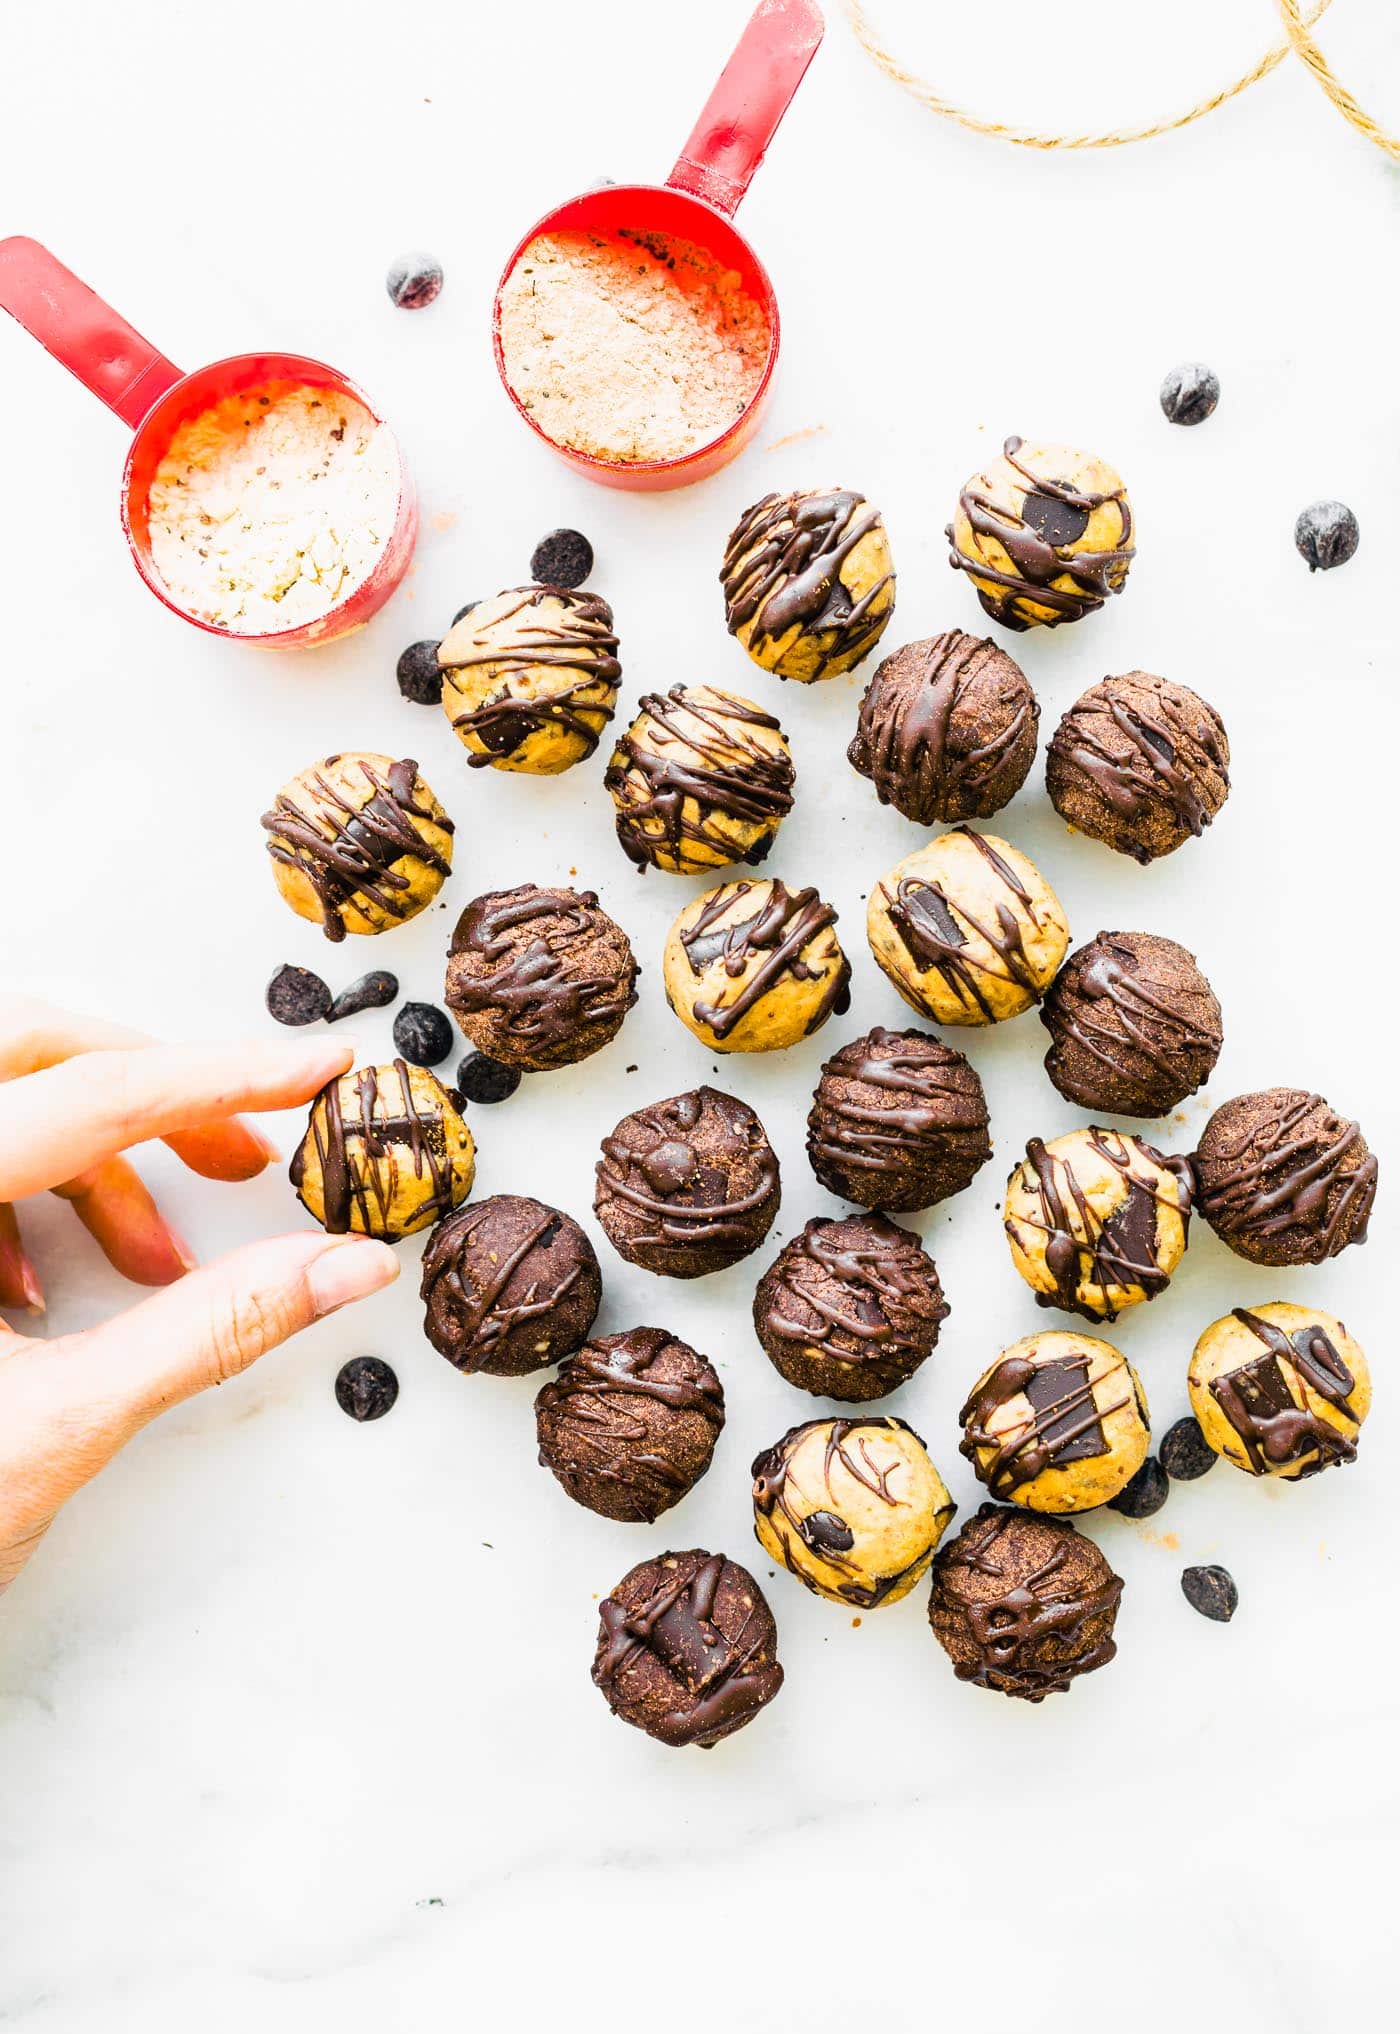 Several dark chocolate protein balls with chocolate drizzle on white counter, one ball being picked up.